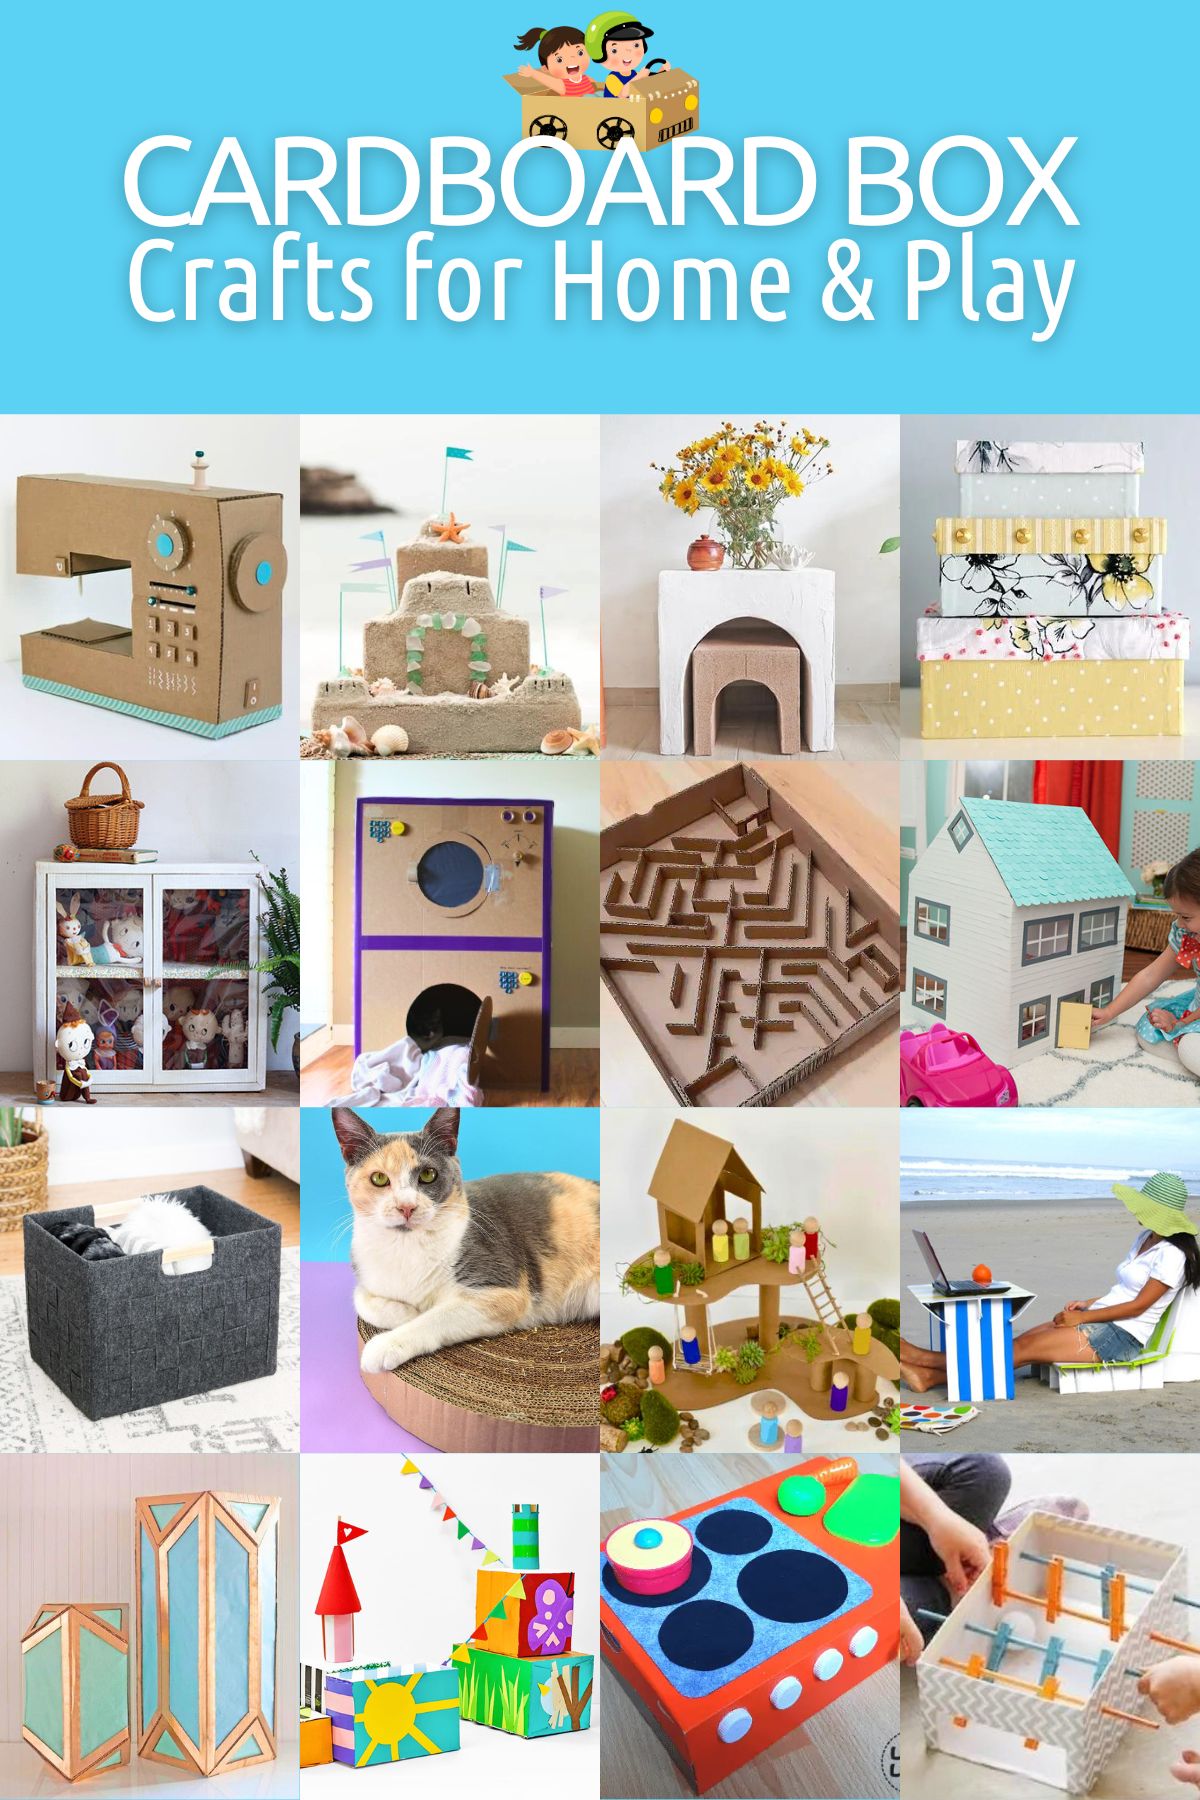 Cardboard box crafts for home and play